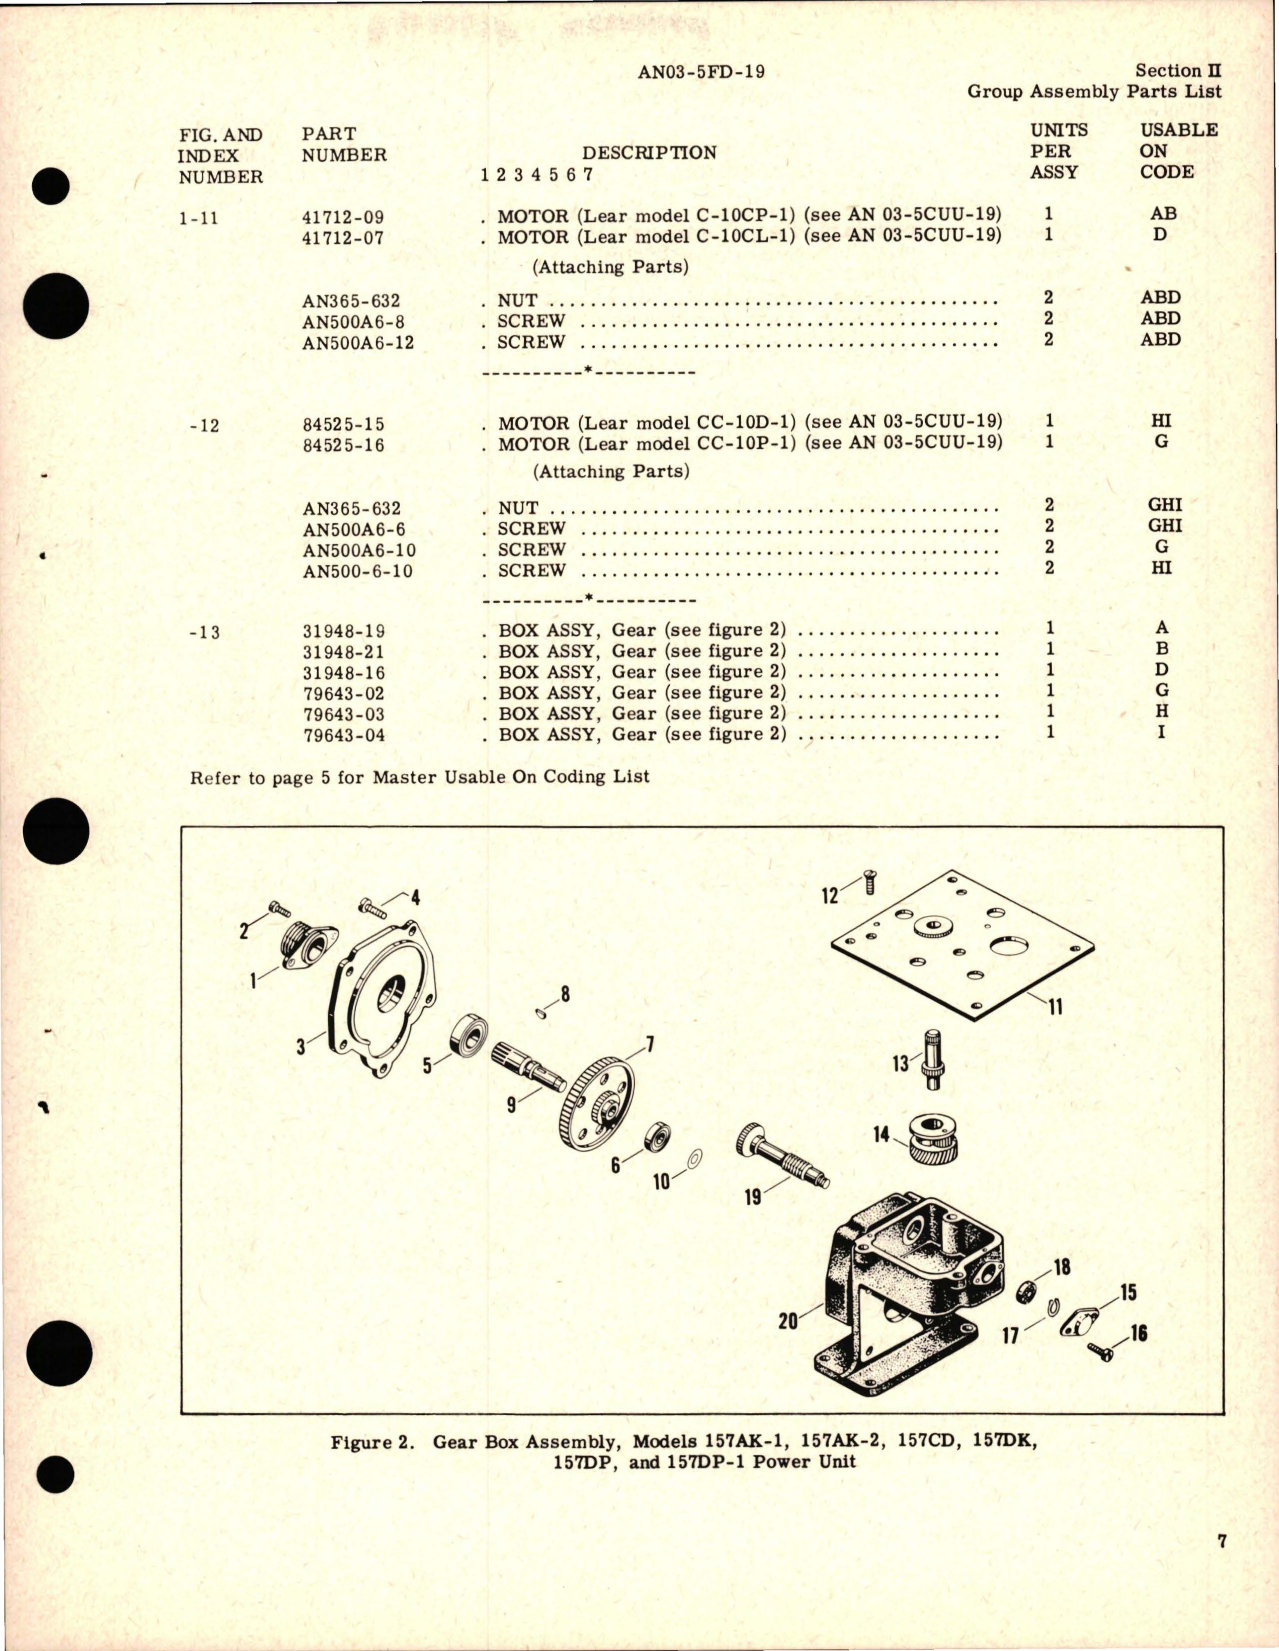 Sample page 9 from AirCorps Library document: Illustrated Parts Breakdown for Power Unit 